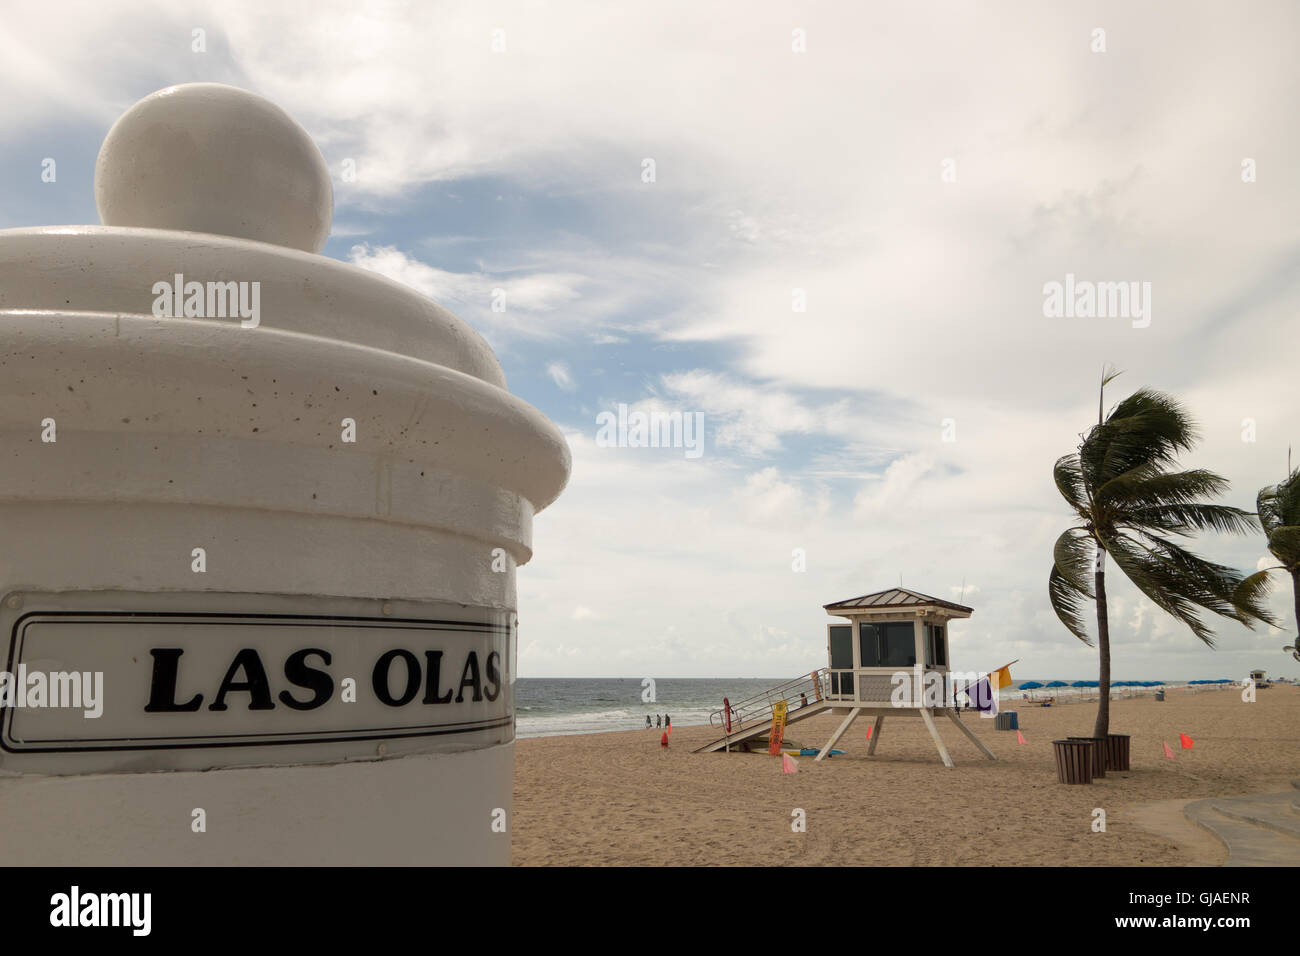 Morning Scene at the beach in Ft Lauderdale, Florida where the A1A and Las Olas blvd meet Stock Photo